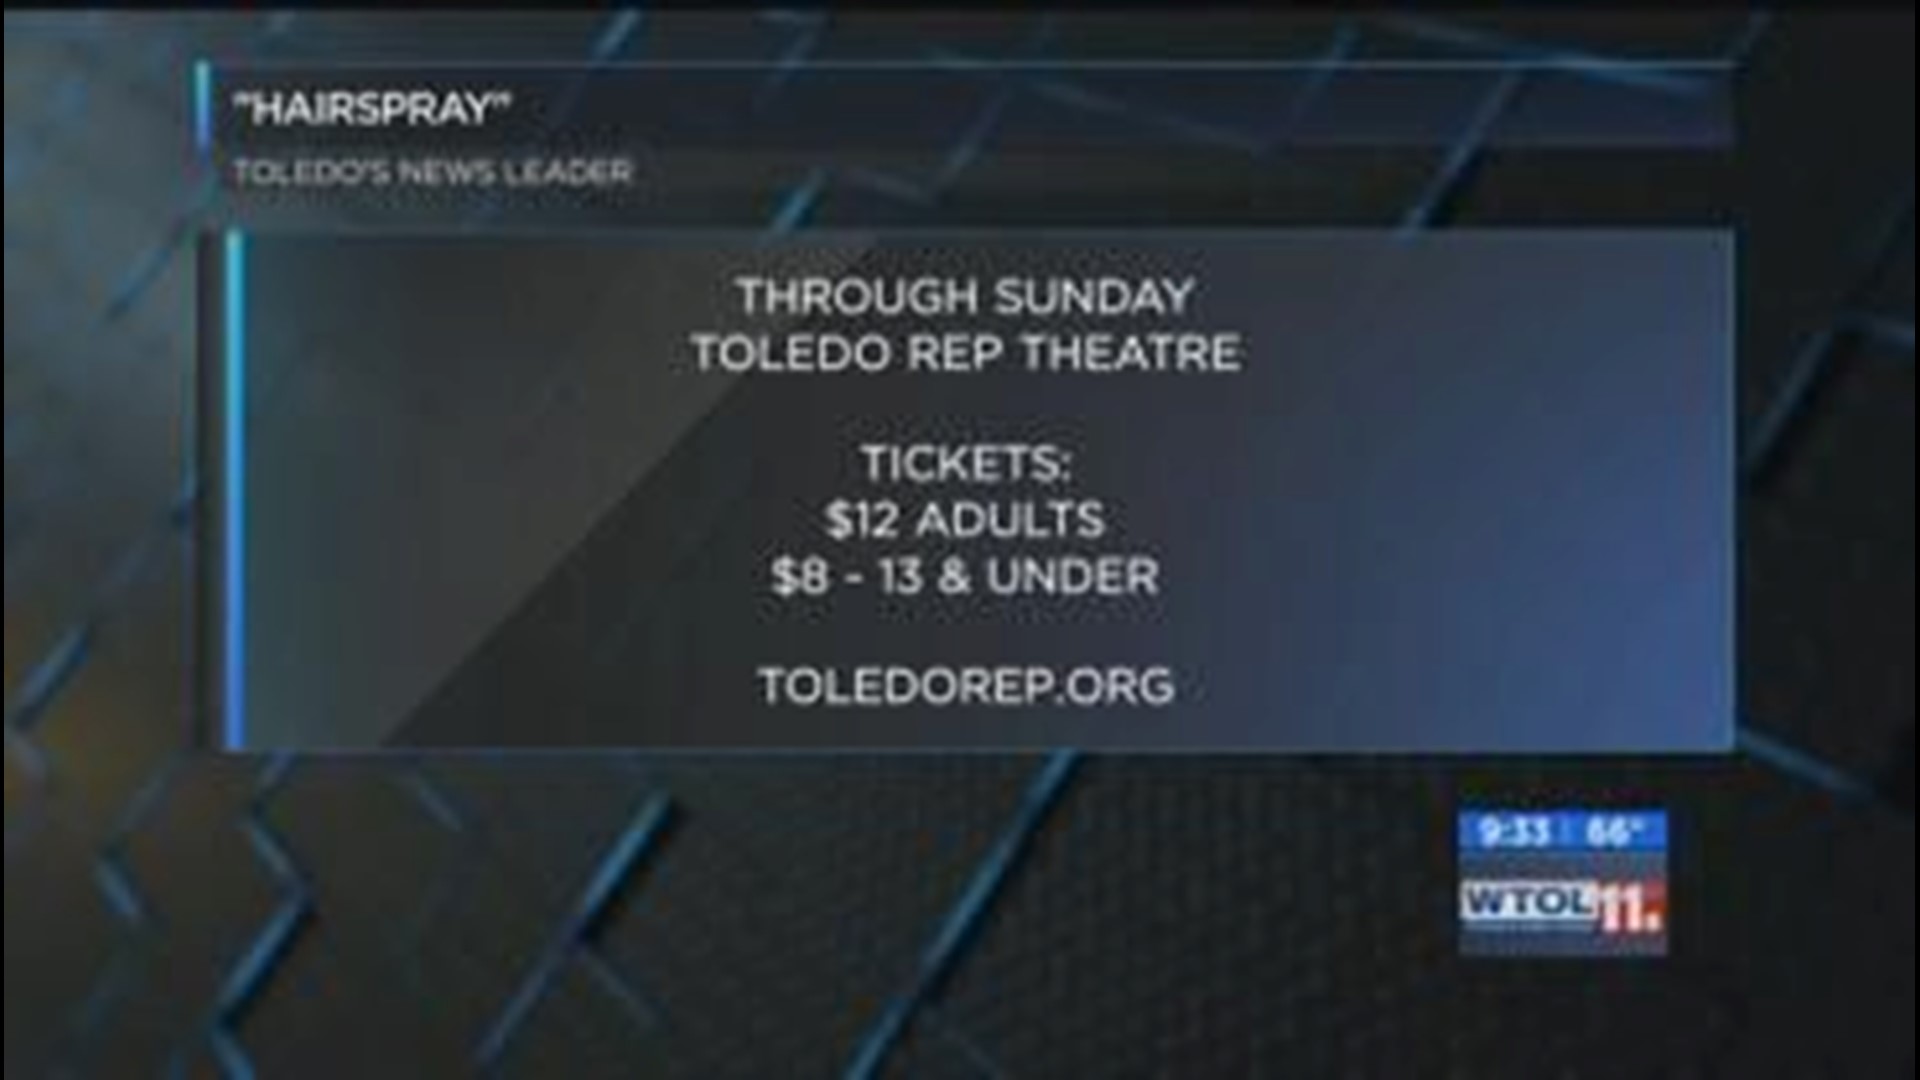 The Toledo Repertoire Theatre gives a little taste of 'Hairspray'